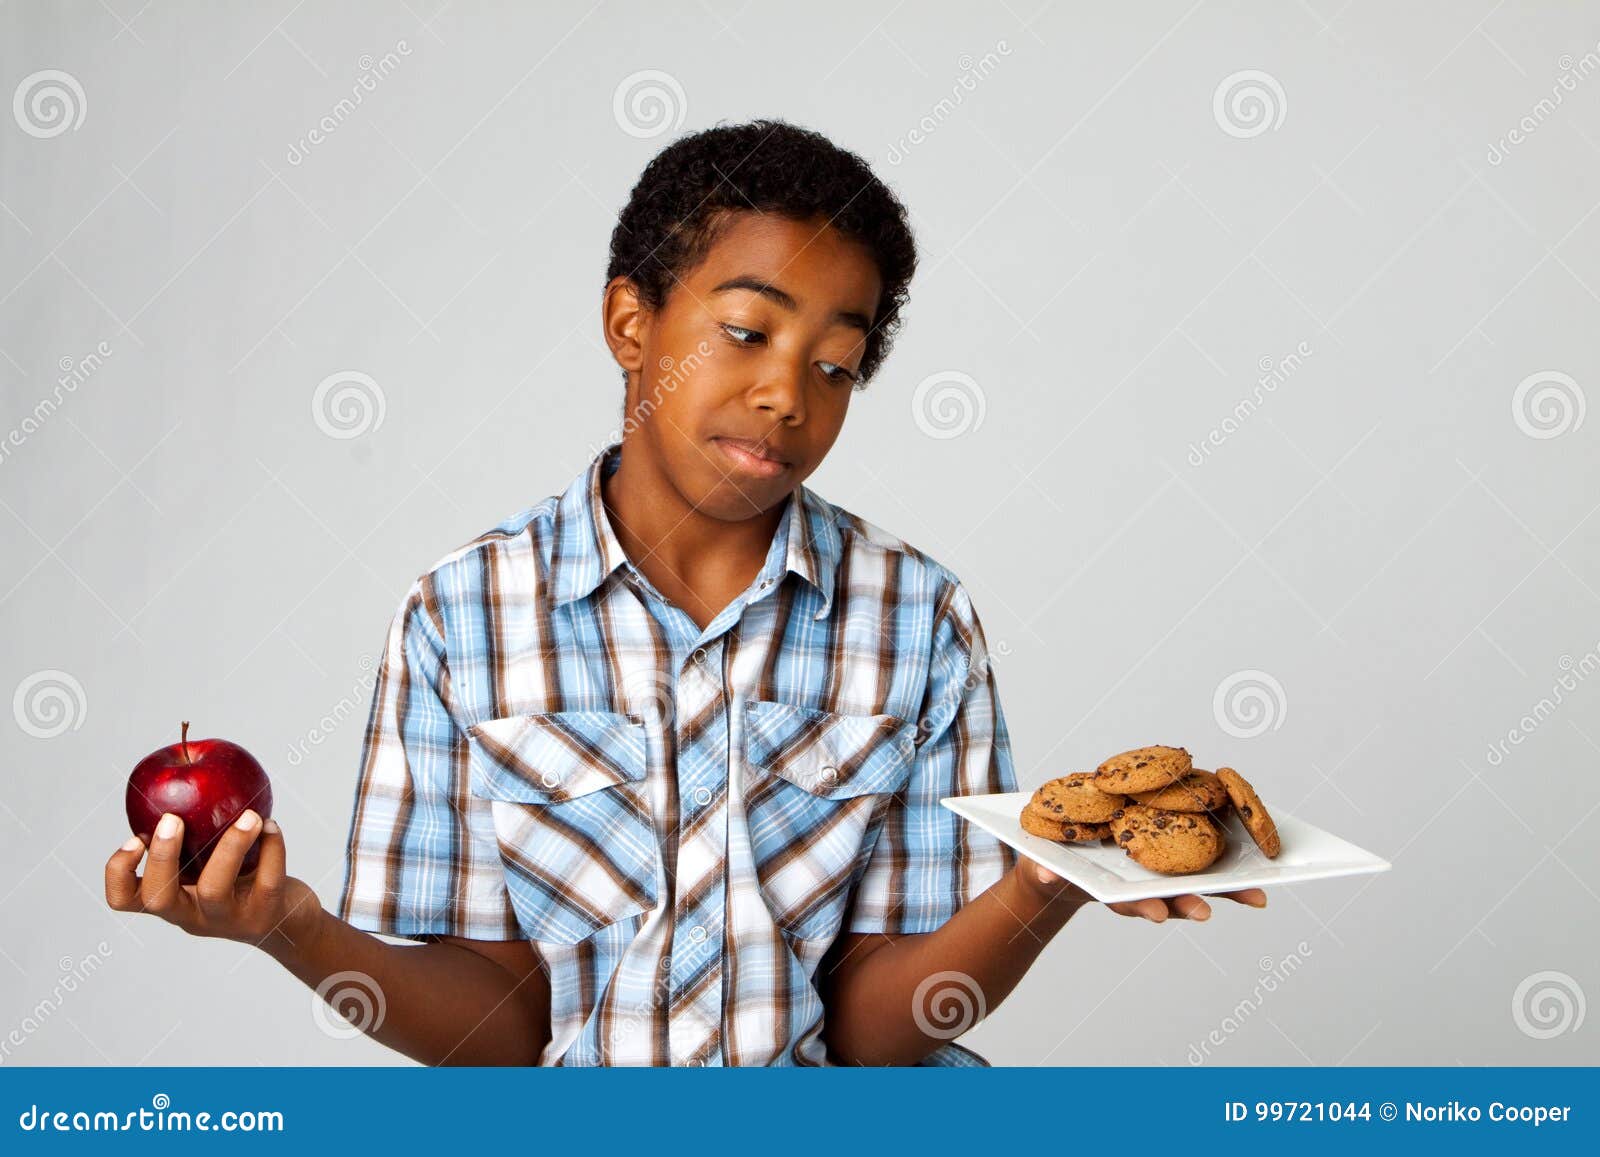 little boy making decisions of eating healthy verses unhealthy.